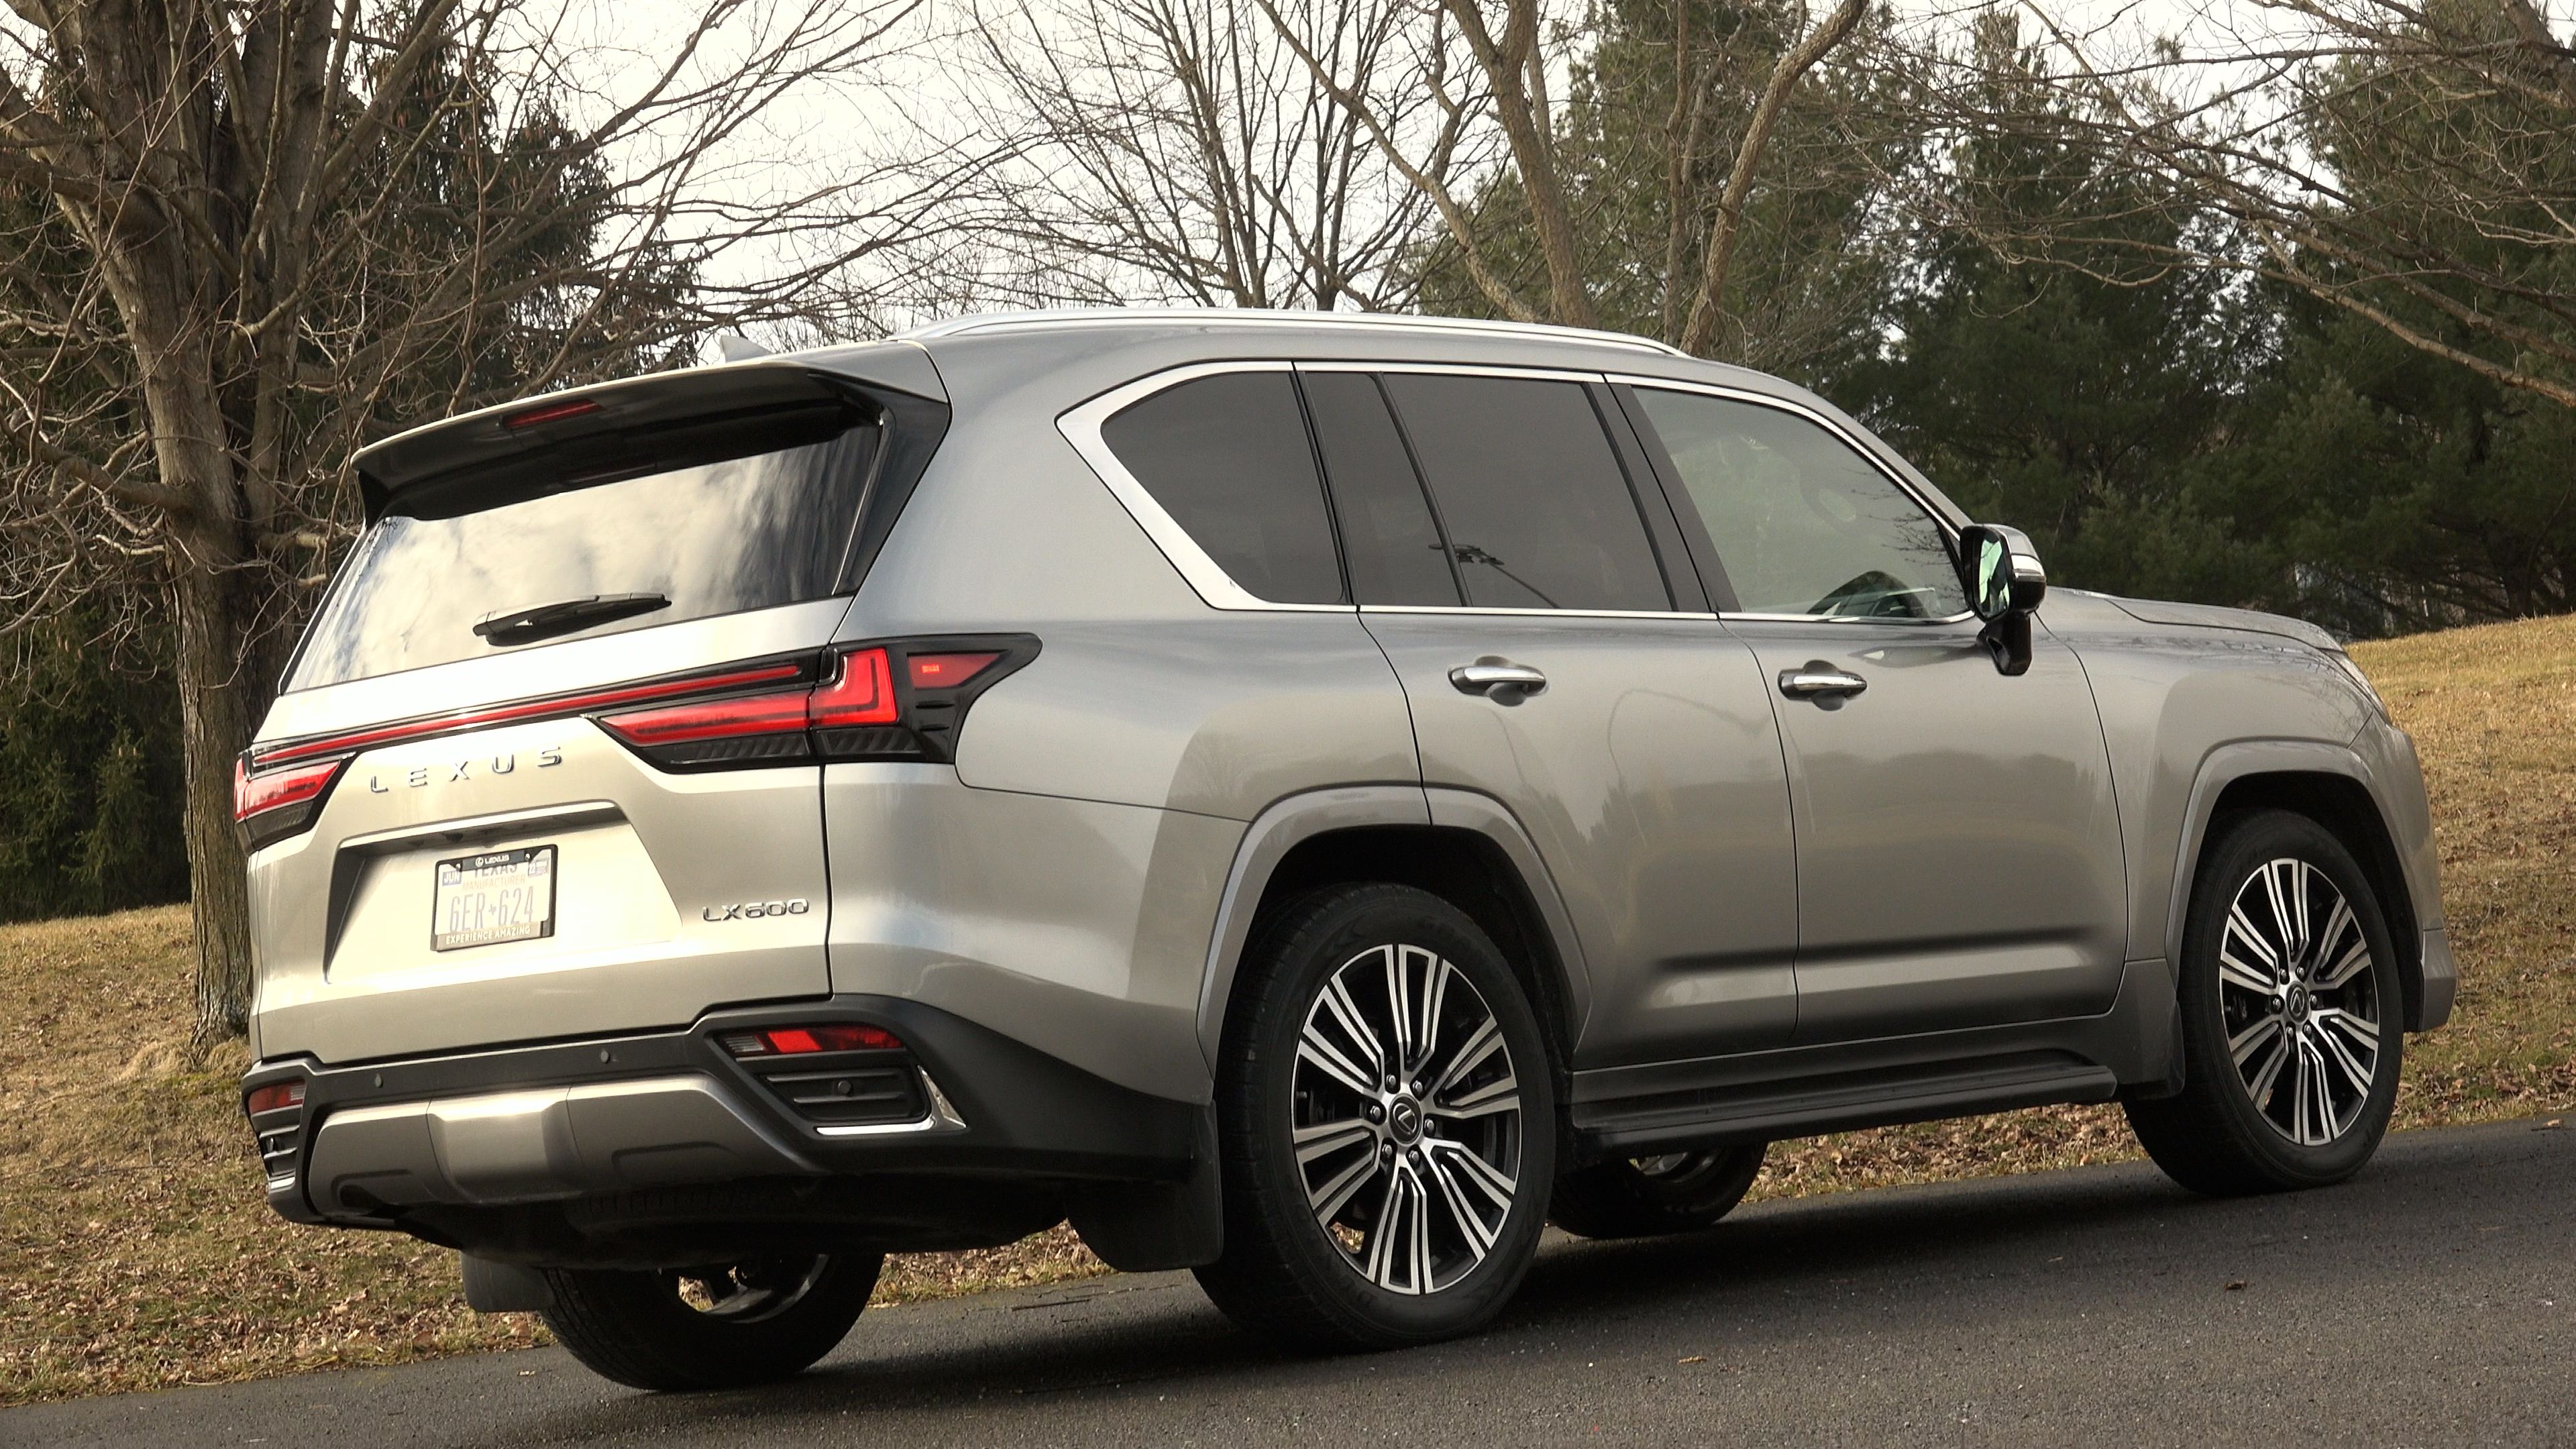 2022 Lexus LX 600 Review: All-New in an Old-School Way